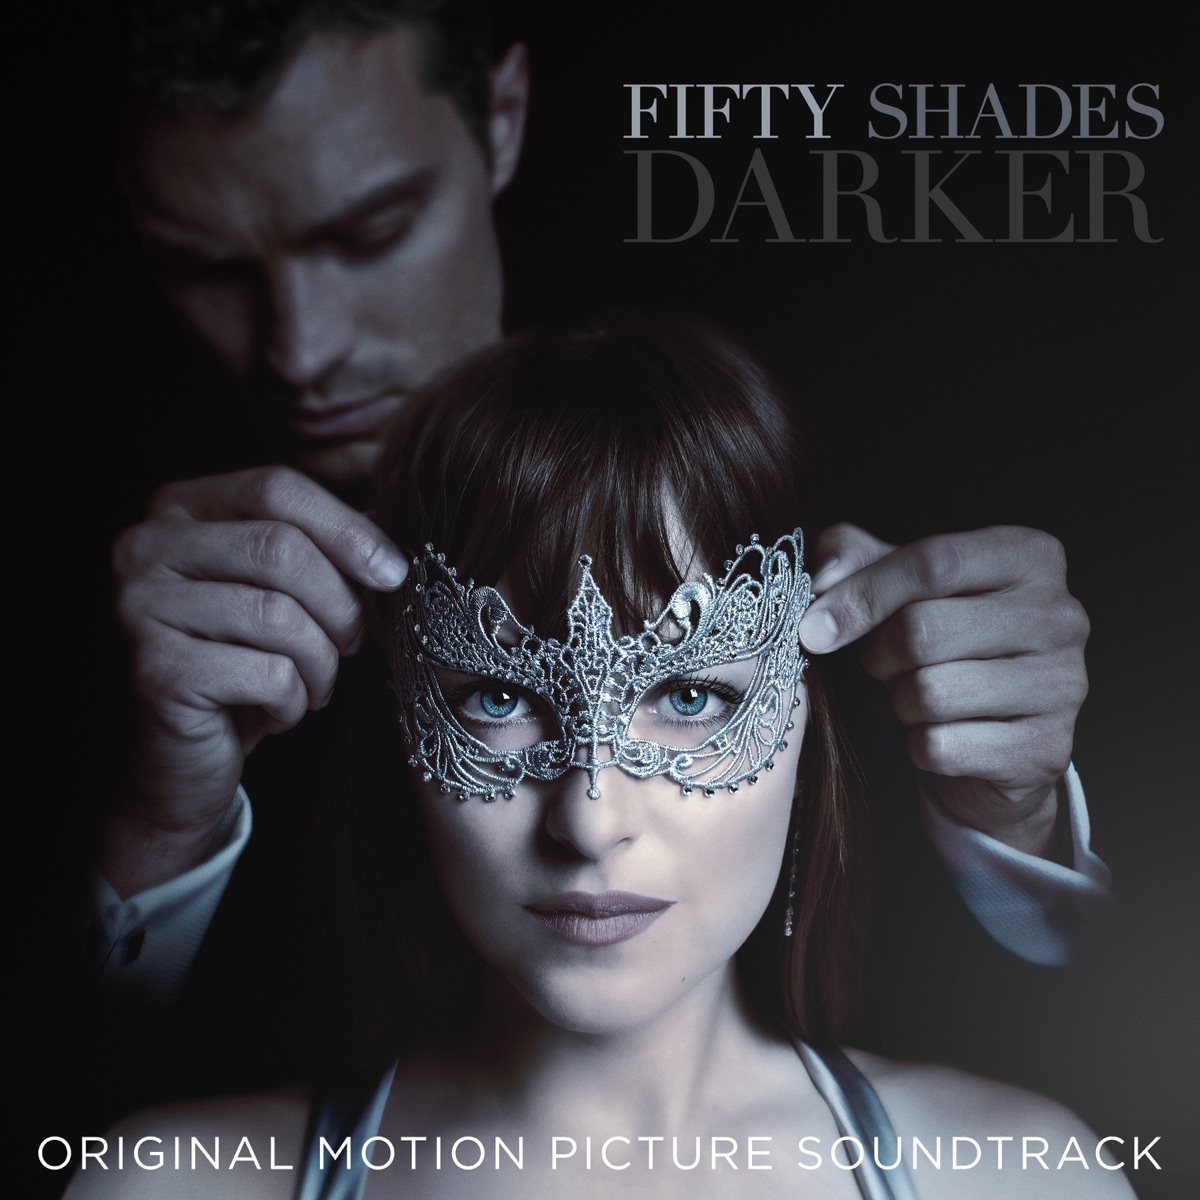 Fifty Shades Darker (Original Motion Picture Soundtrack) by Various Artists  on Apple Music